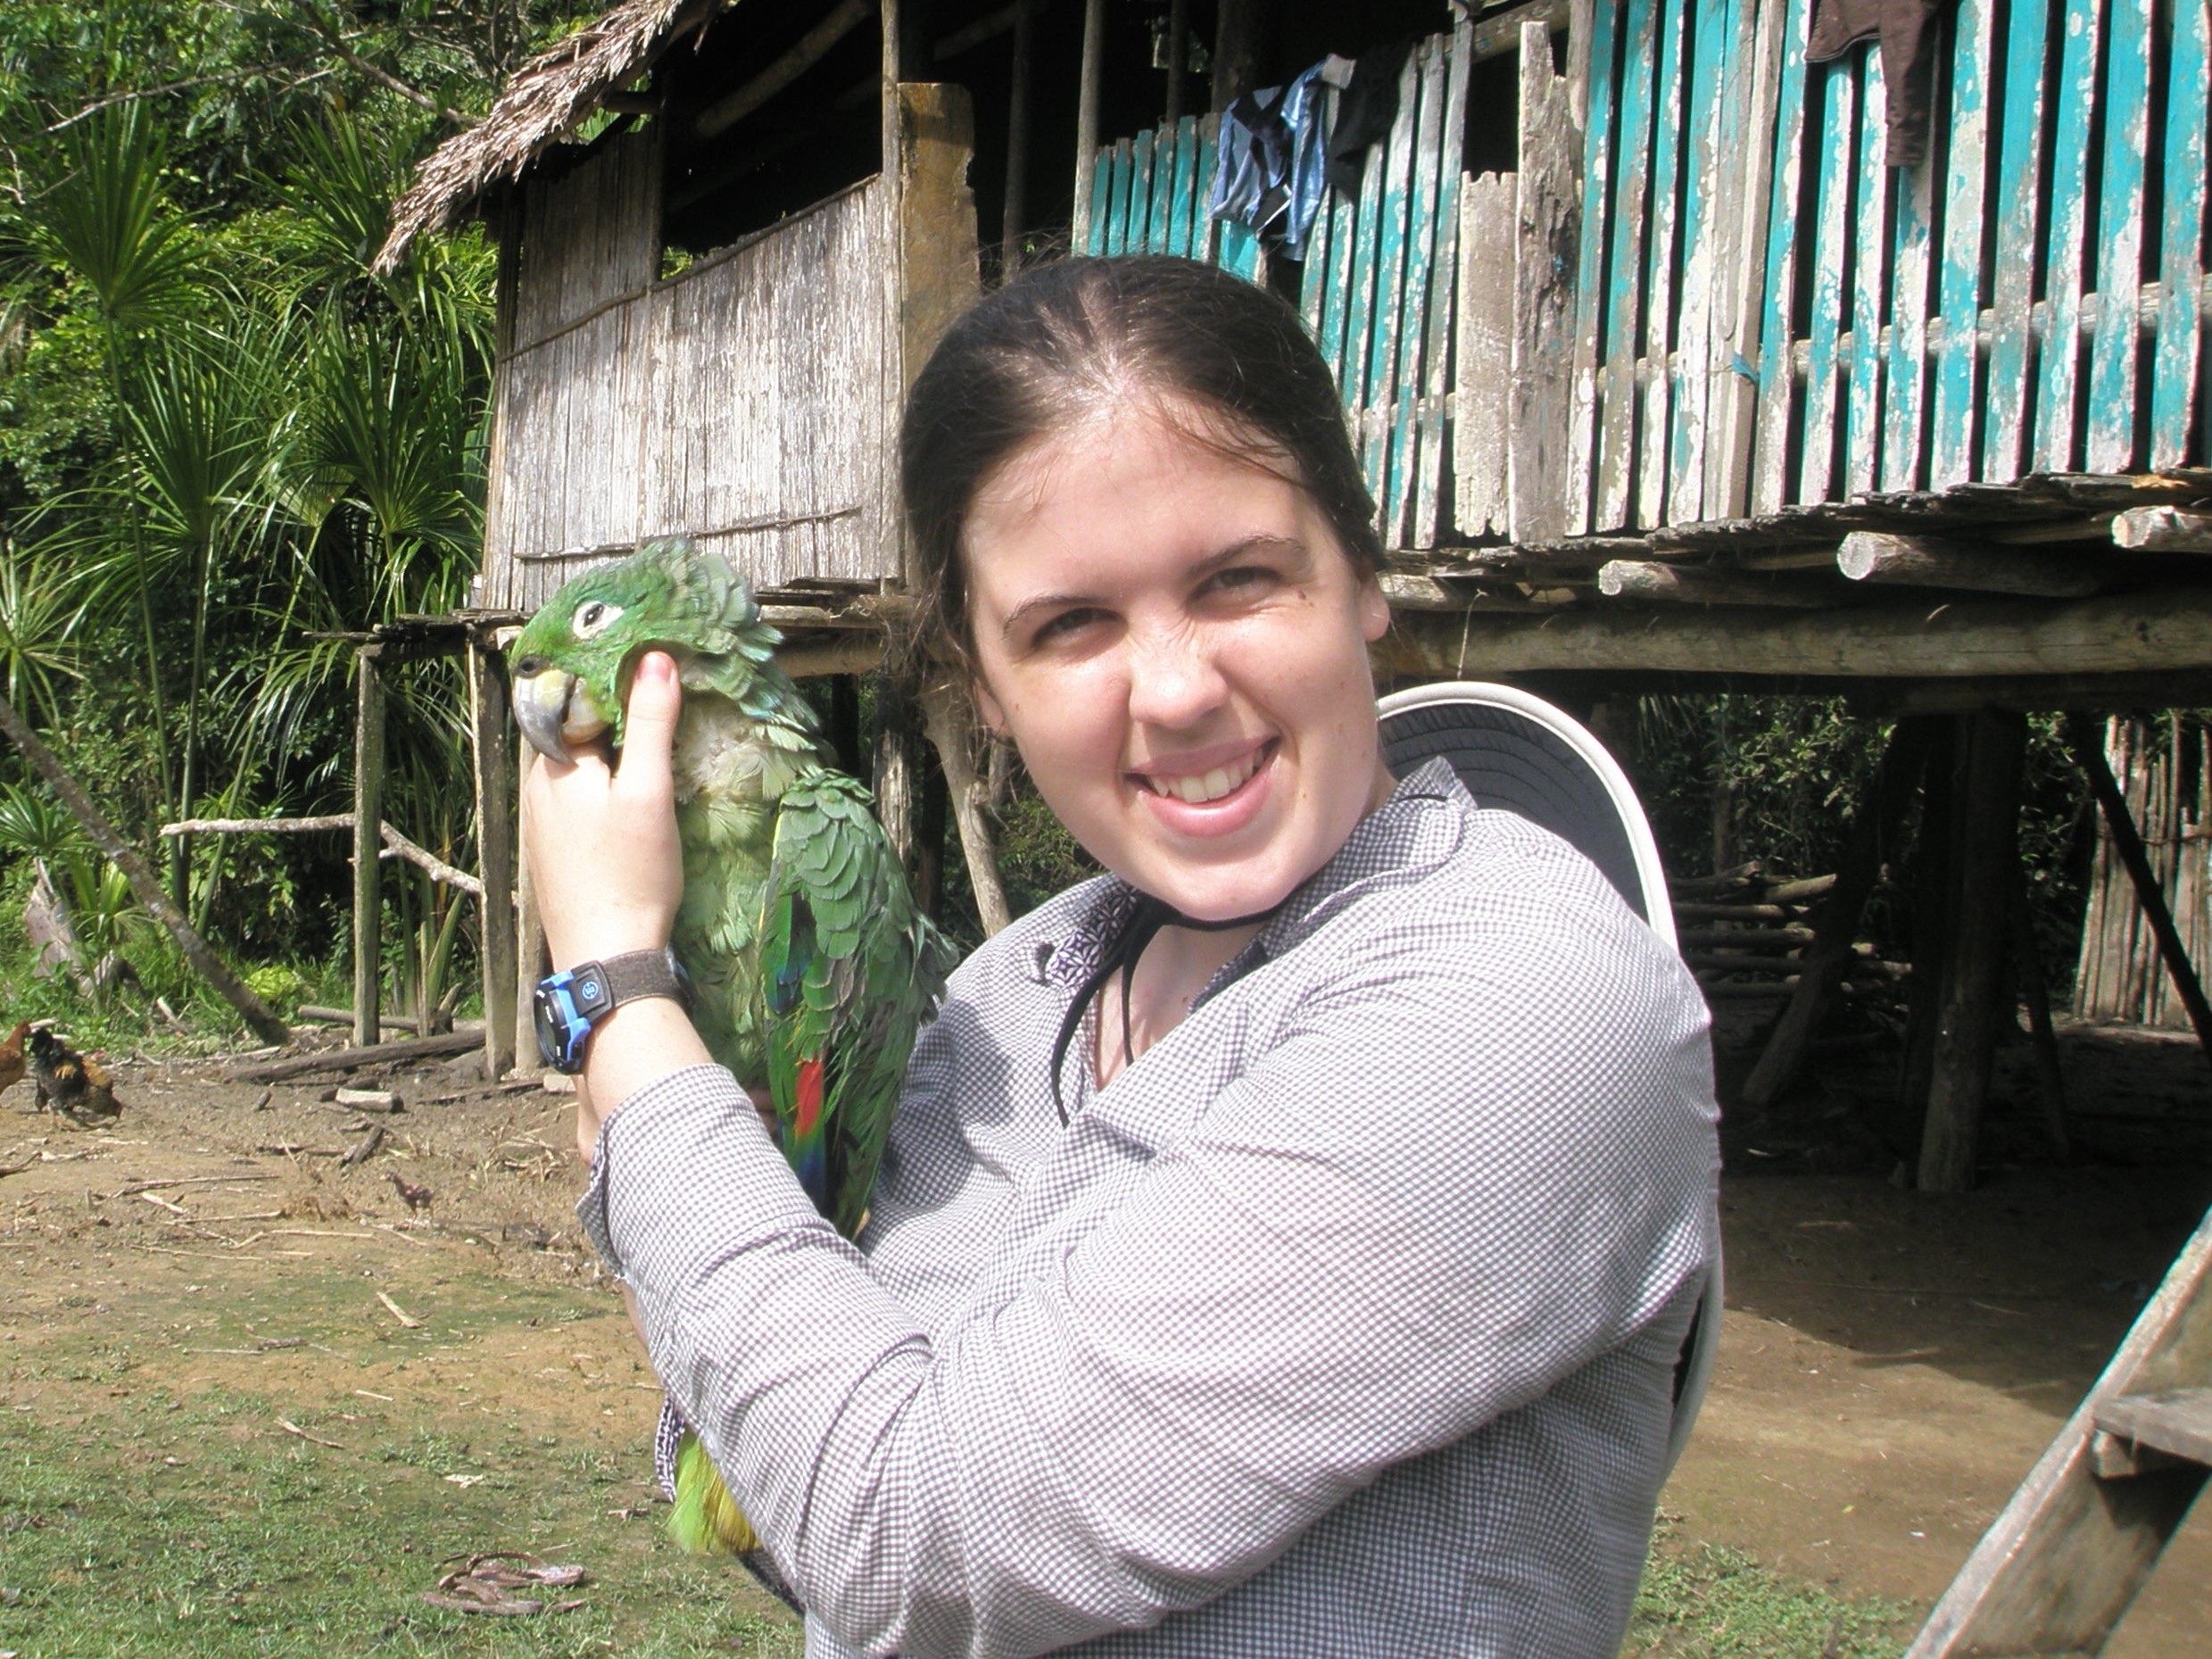 Kelsey holding an Amazon parrot in the field